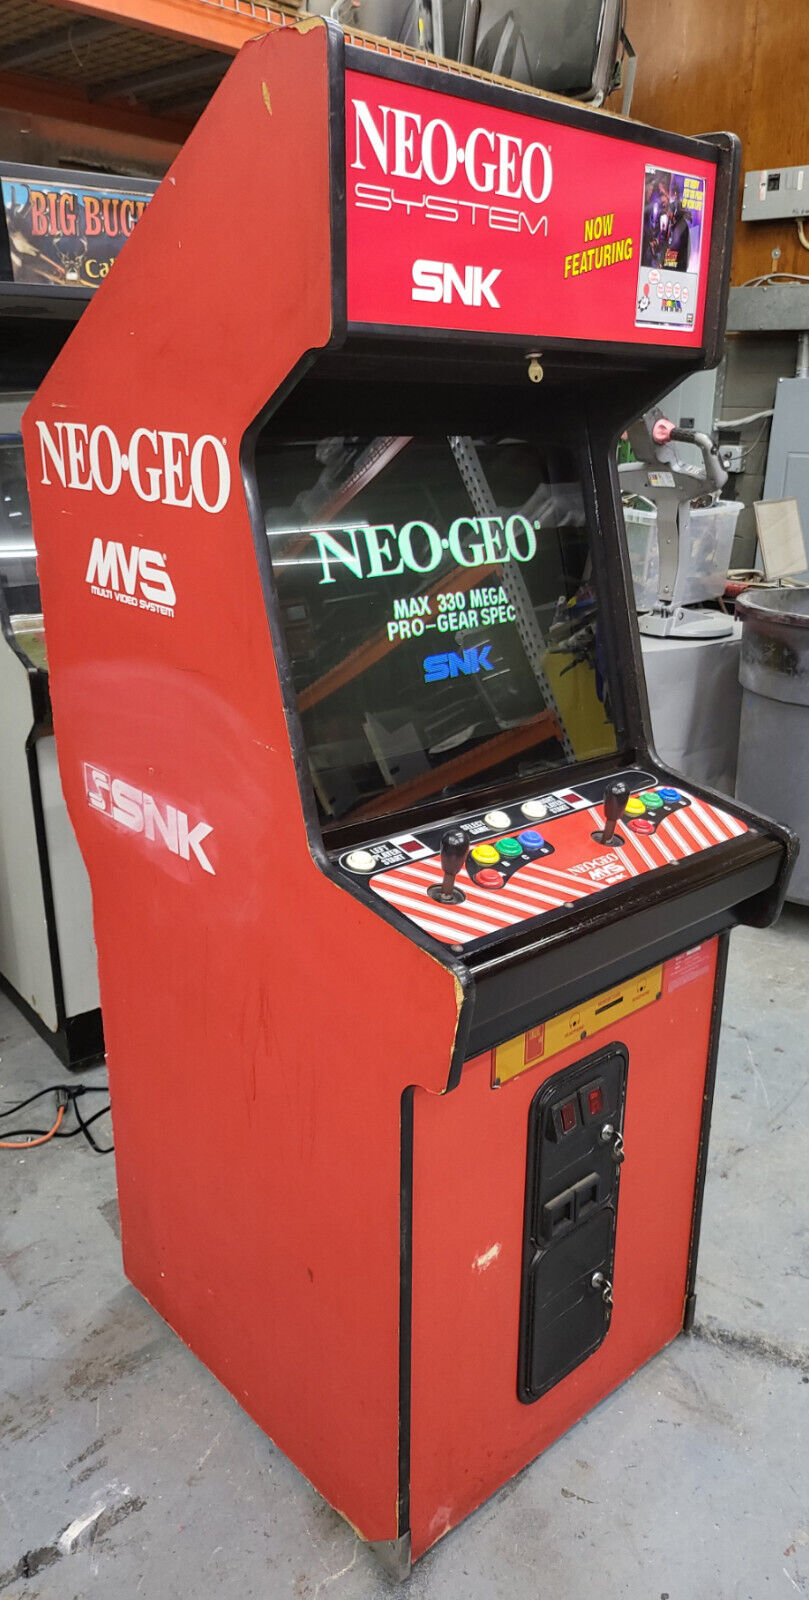 NEO GEO 1 Slot (Fighters History Dynamite) Stand Up Classic Video Arcade Machine